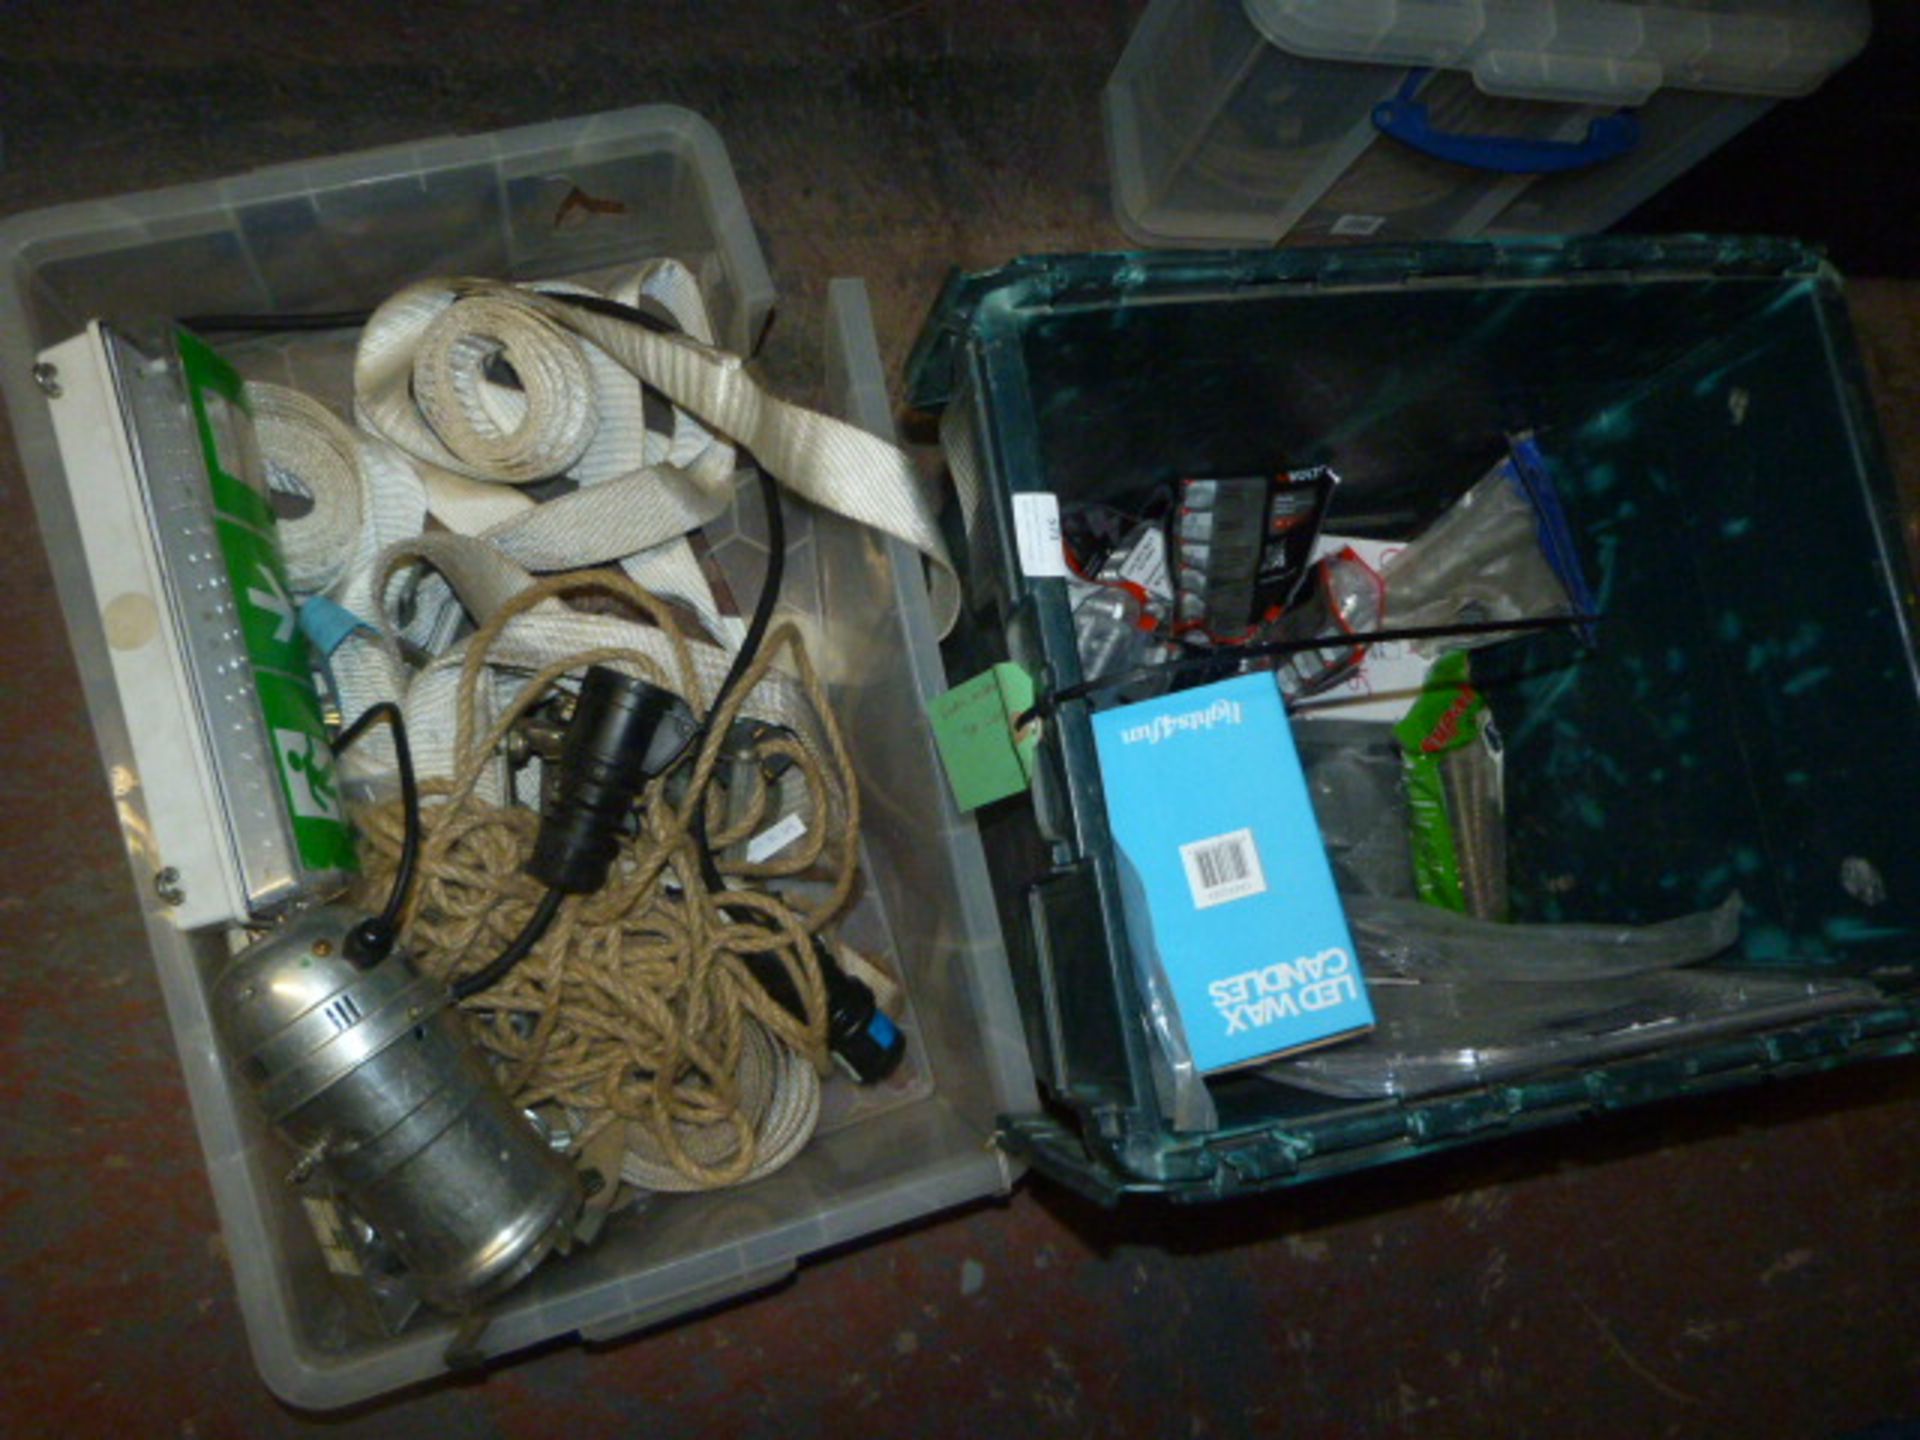 *Two Boxes Containing Concrete Fixing Bolts, Quantity of Webbing, Rope and LED Candle